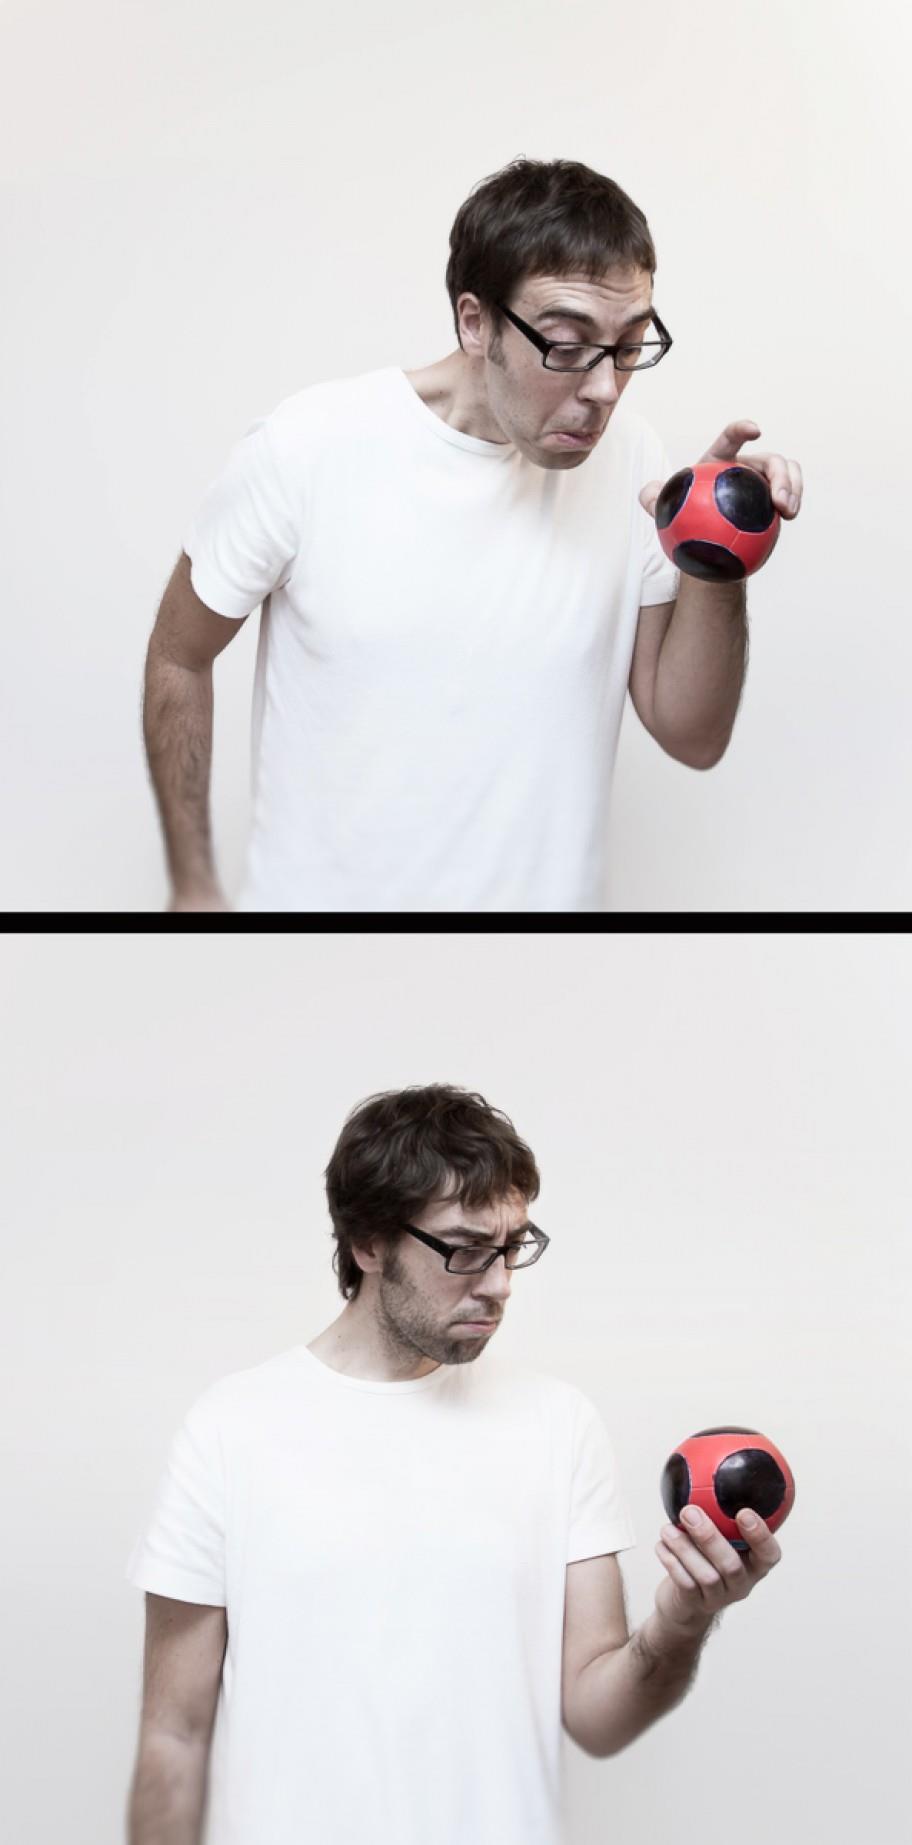 Selfportrait diptych photography - Temporal ellipsis